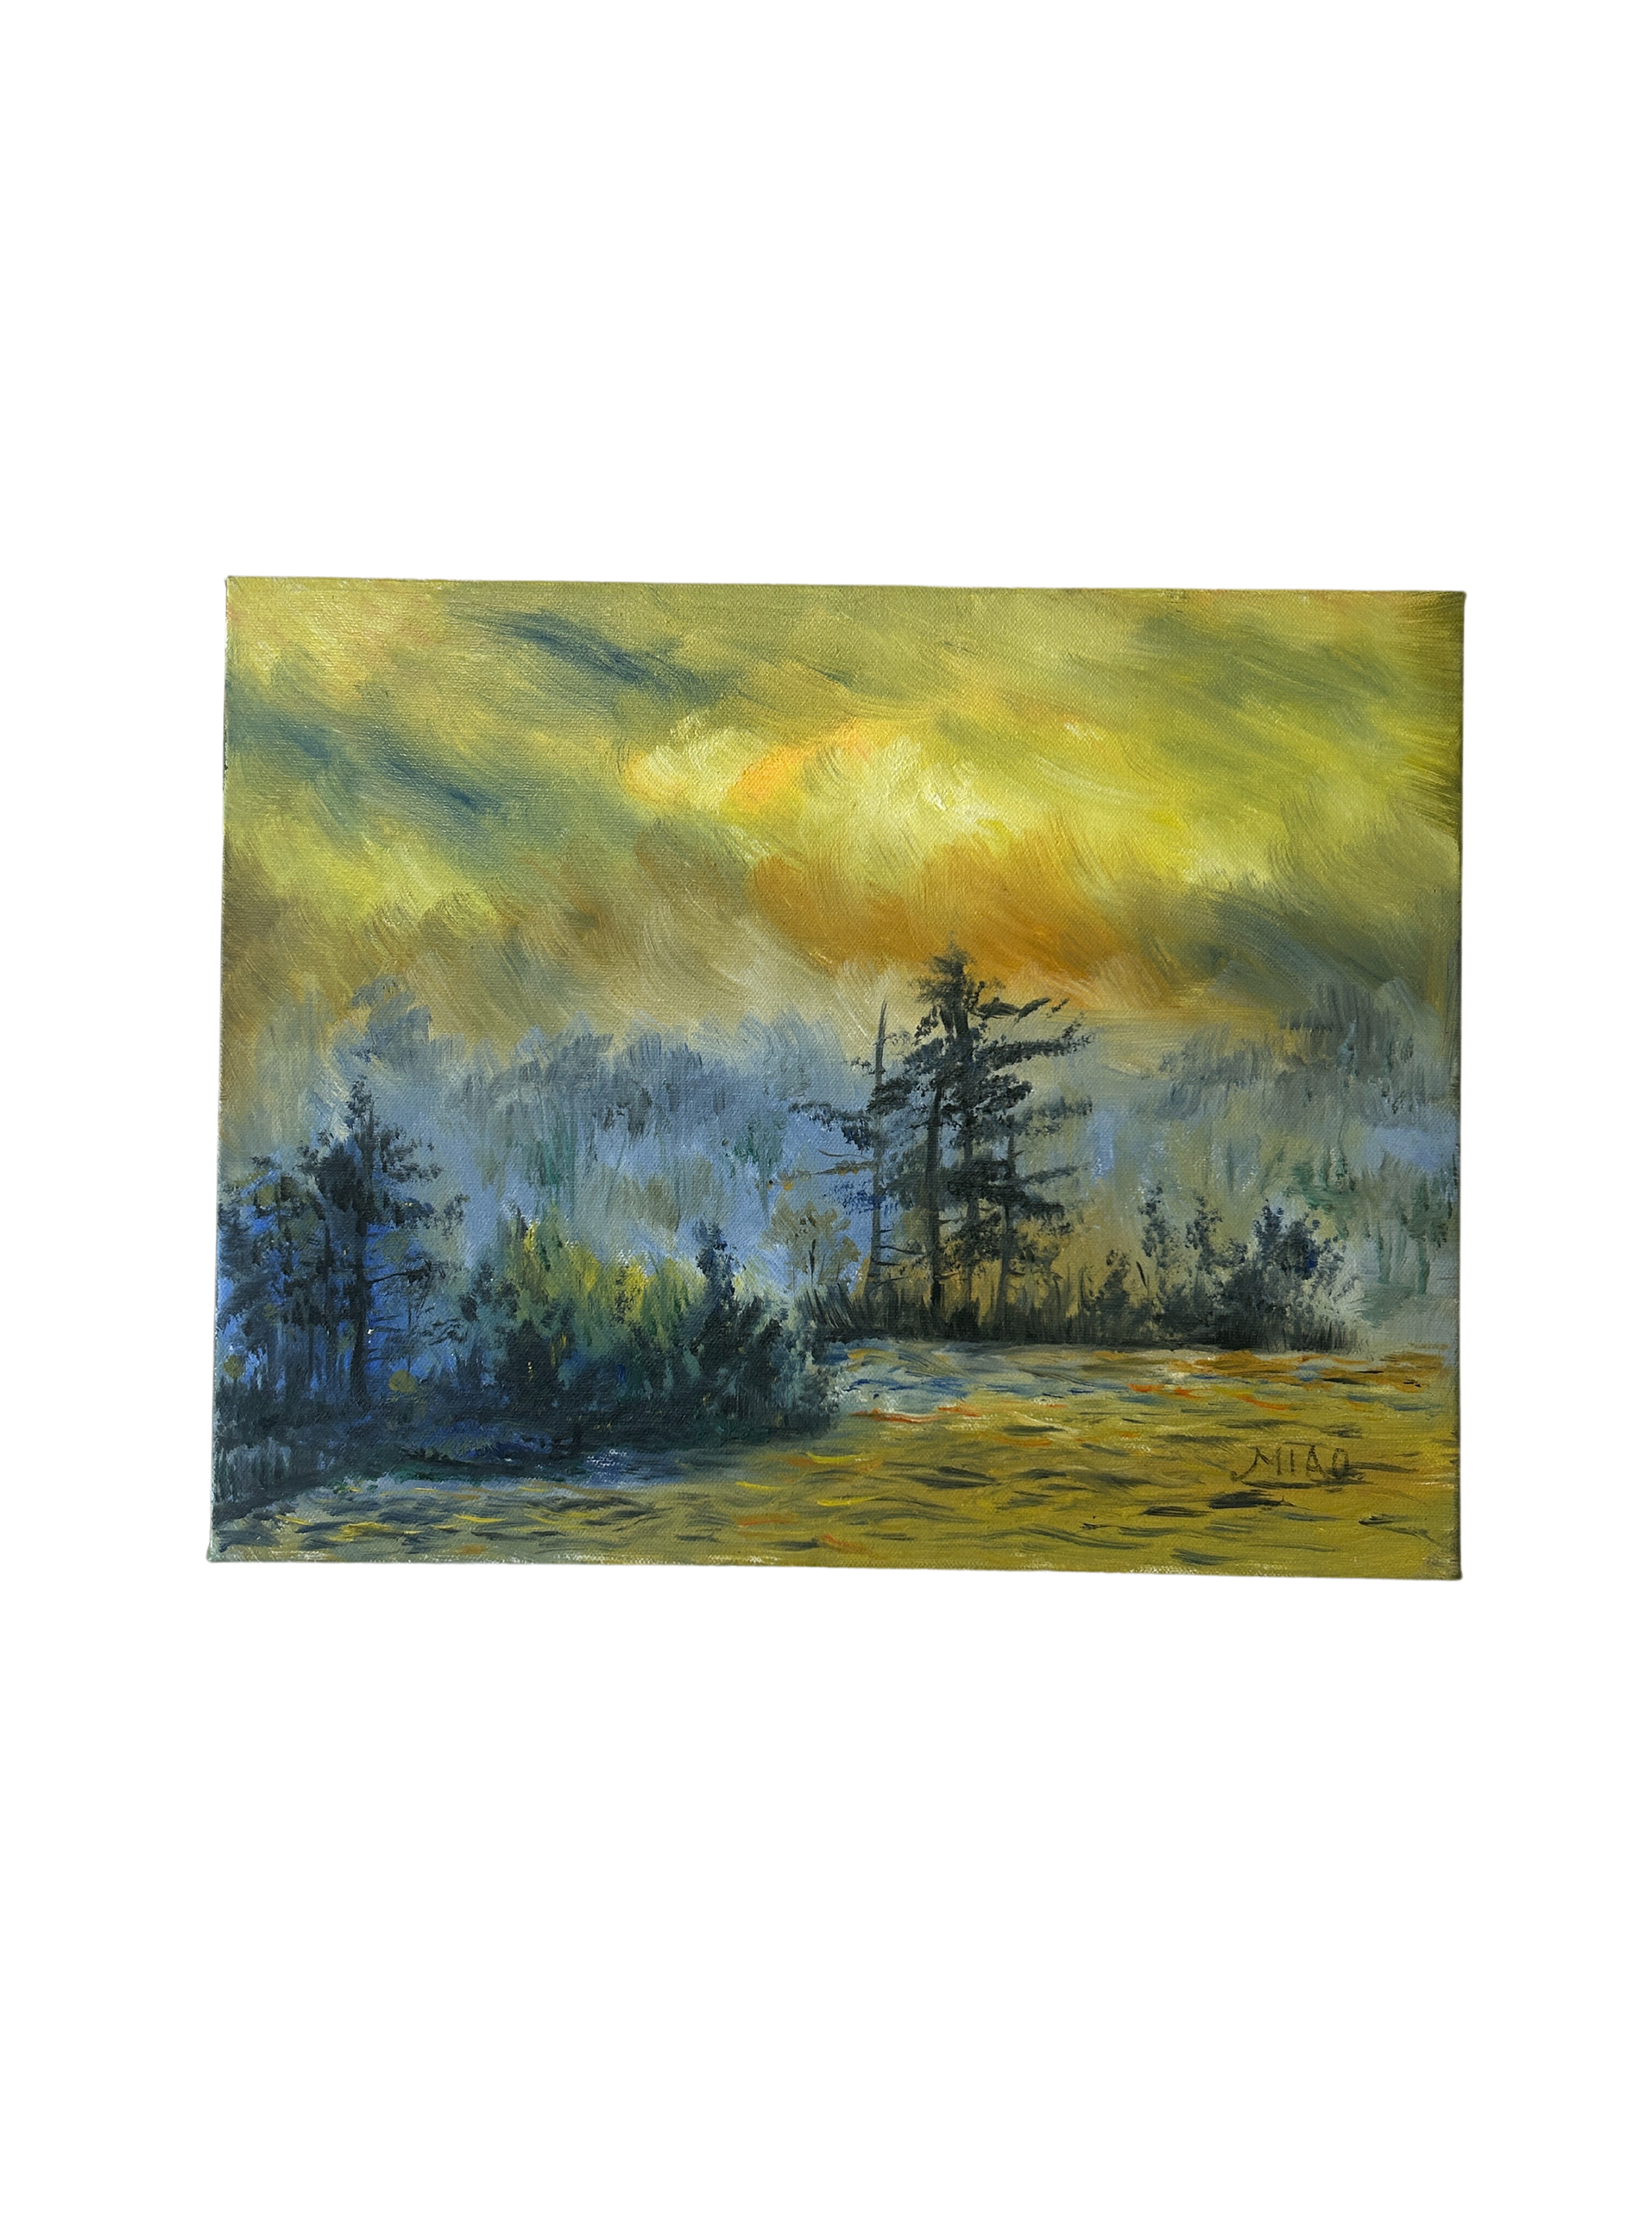 This acrylic and watercolor painting on quality paper captures a serene forest scene, reflecting nature's profound influence on human emotions and serving as a cultural celebration of its beauty, available at the hearing clinic at Allard Audiology.